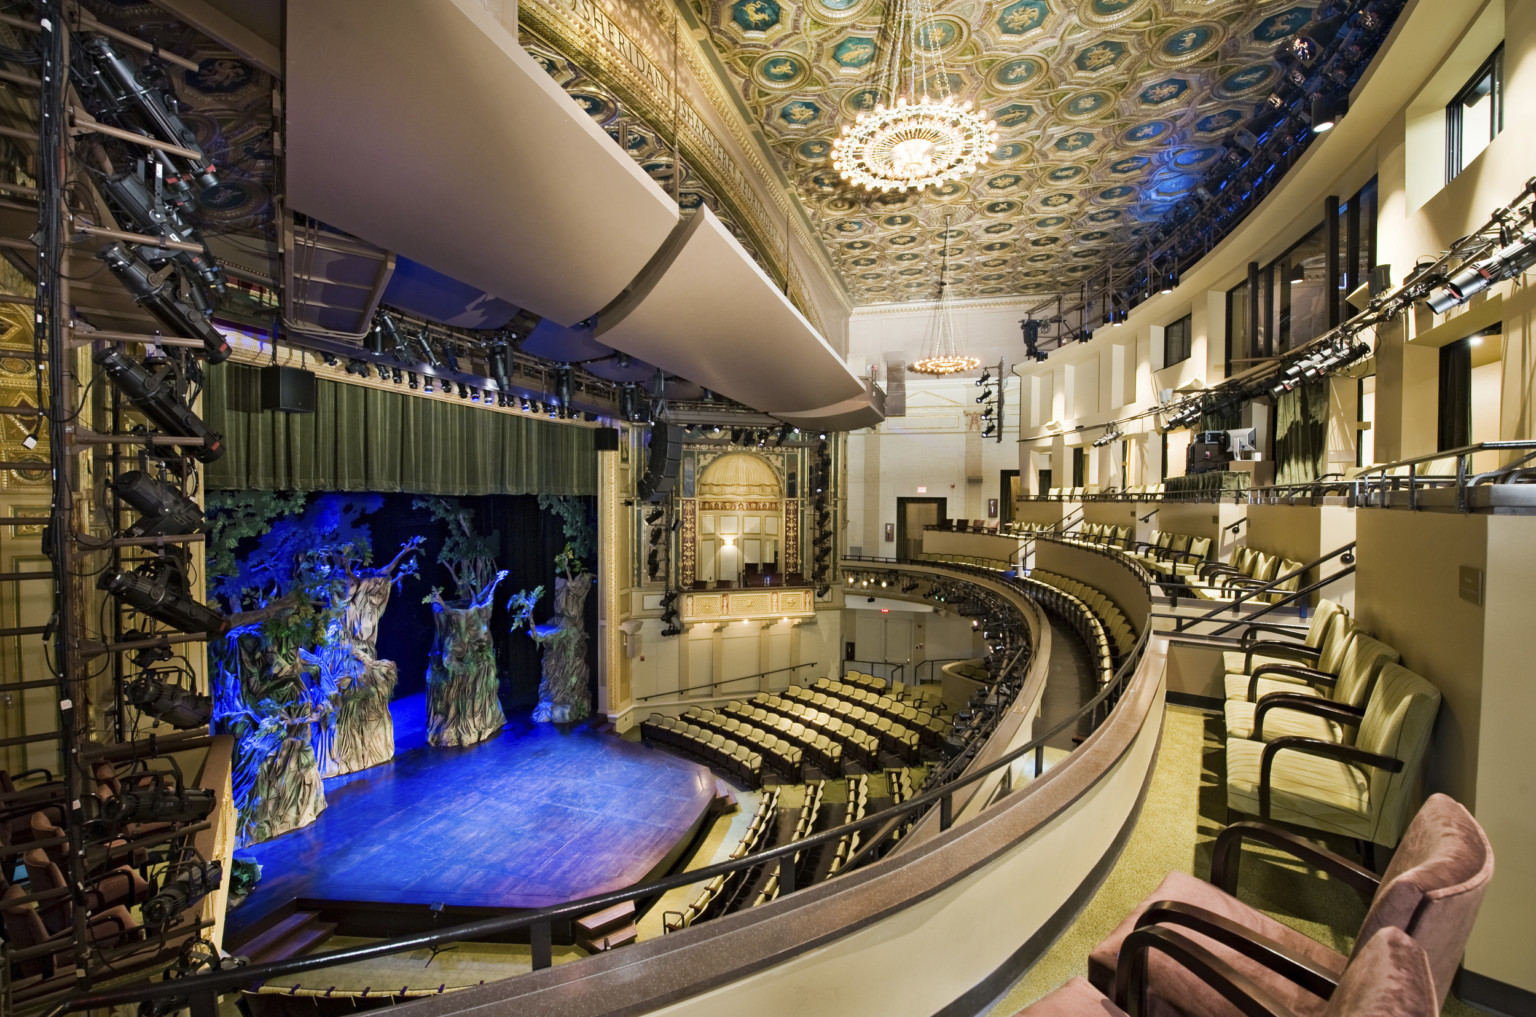 Multiple balconies in a theater with yellow seats and dark details, box seat center with arch overhang and gold details